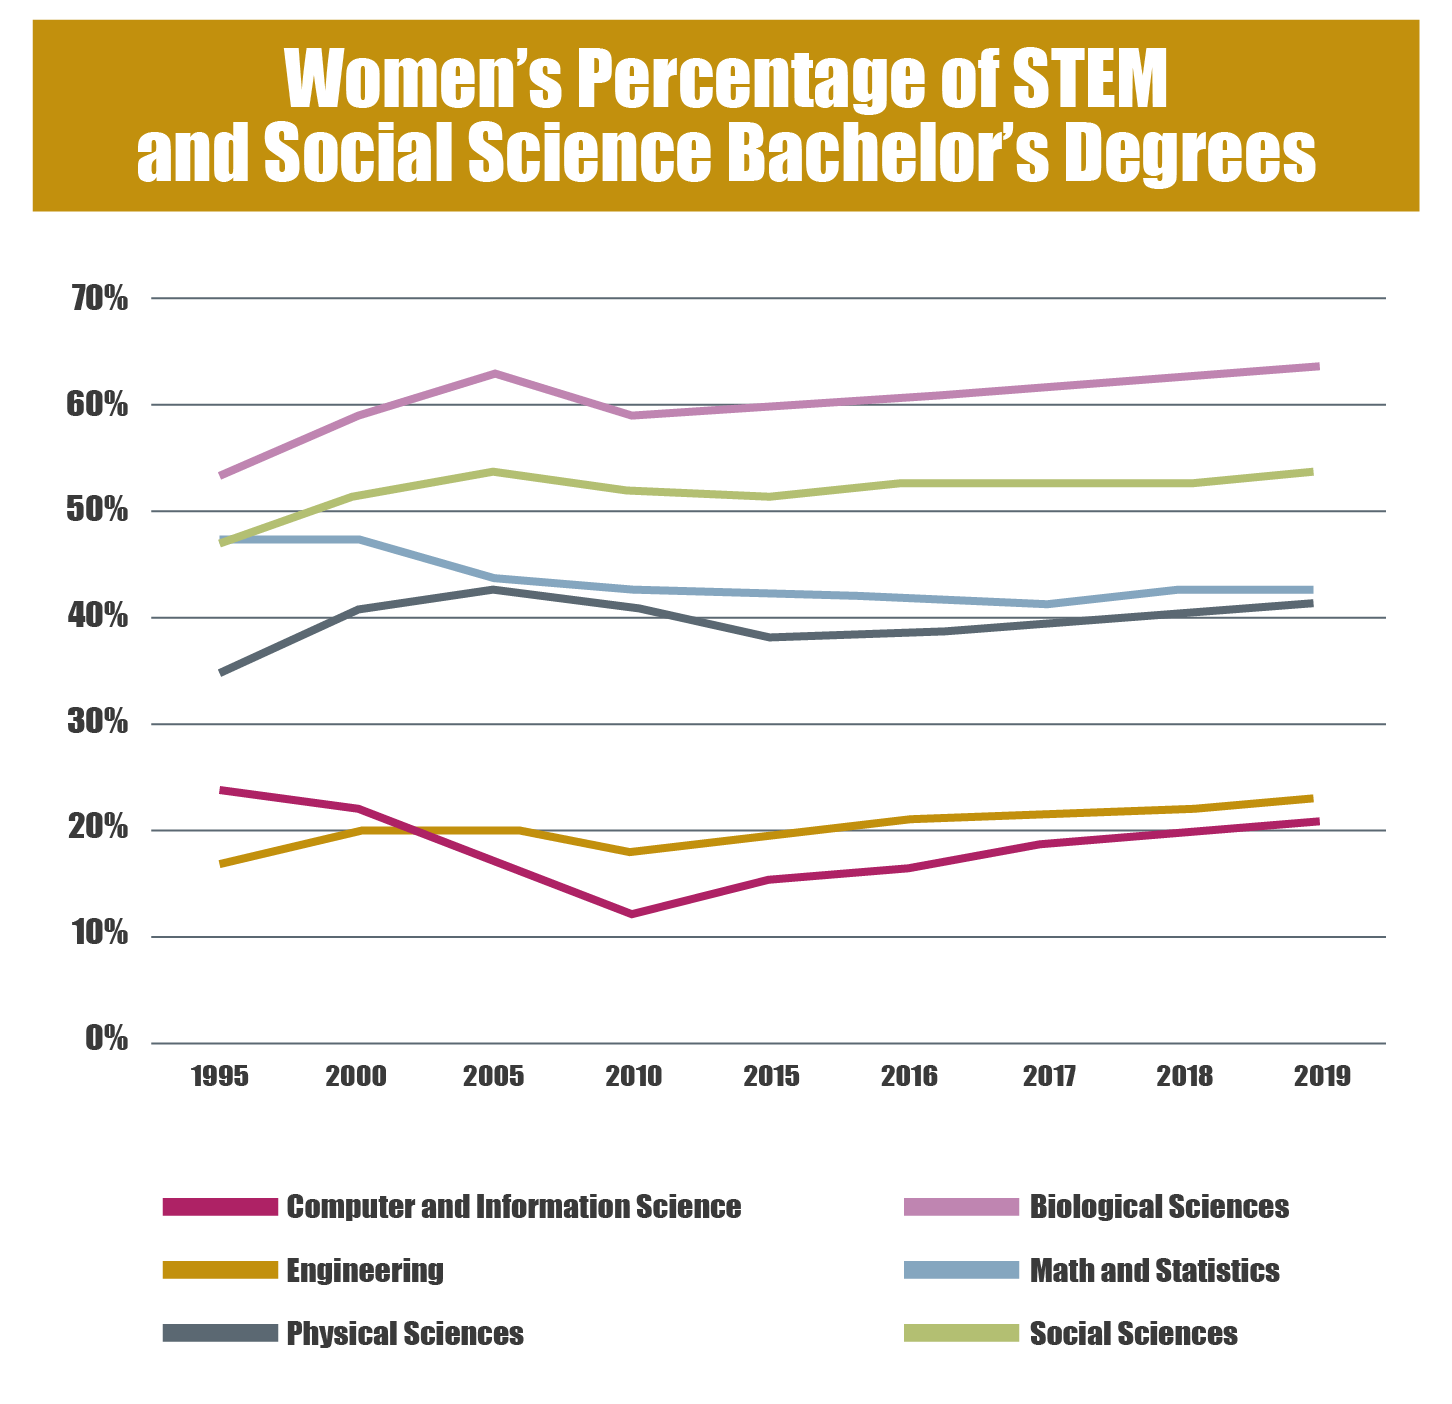 Percentage of women earning STEM and social science bachelor's degrees from 1995 to 2019. The graph shows a slight and steady increase in the number of women earning STEM and social science degrees.